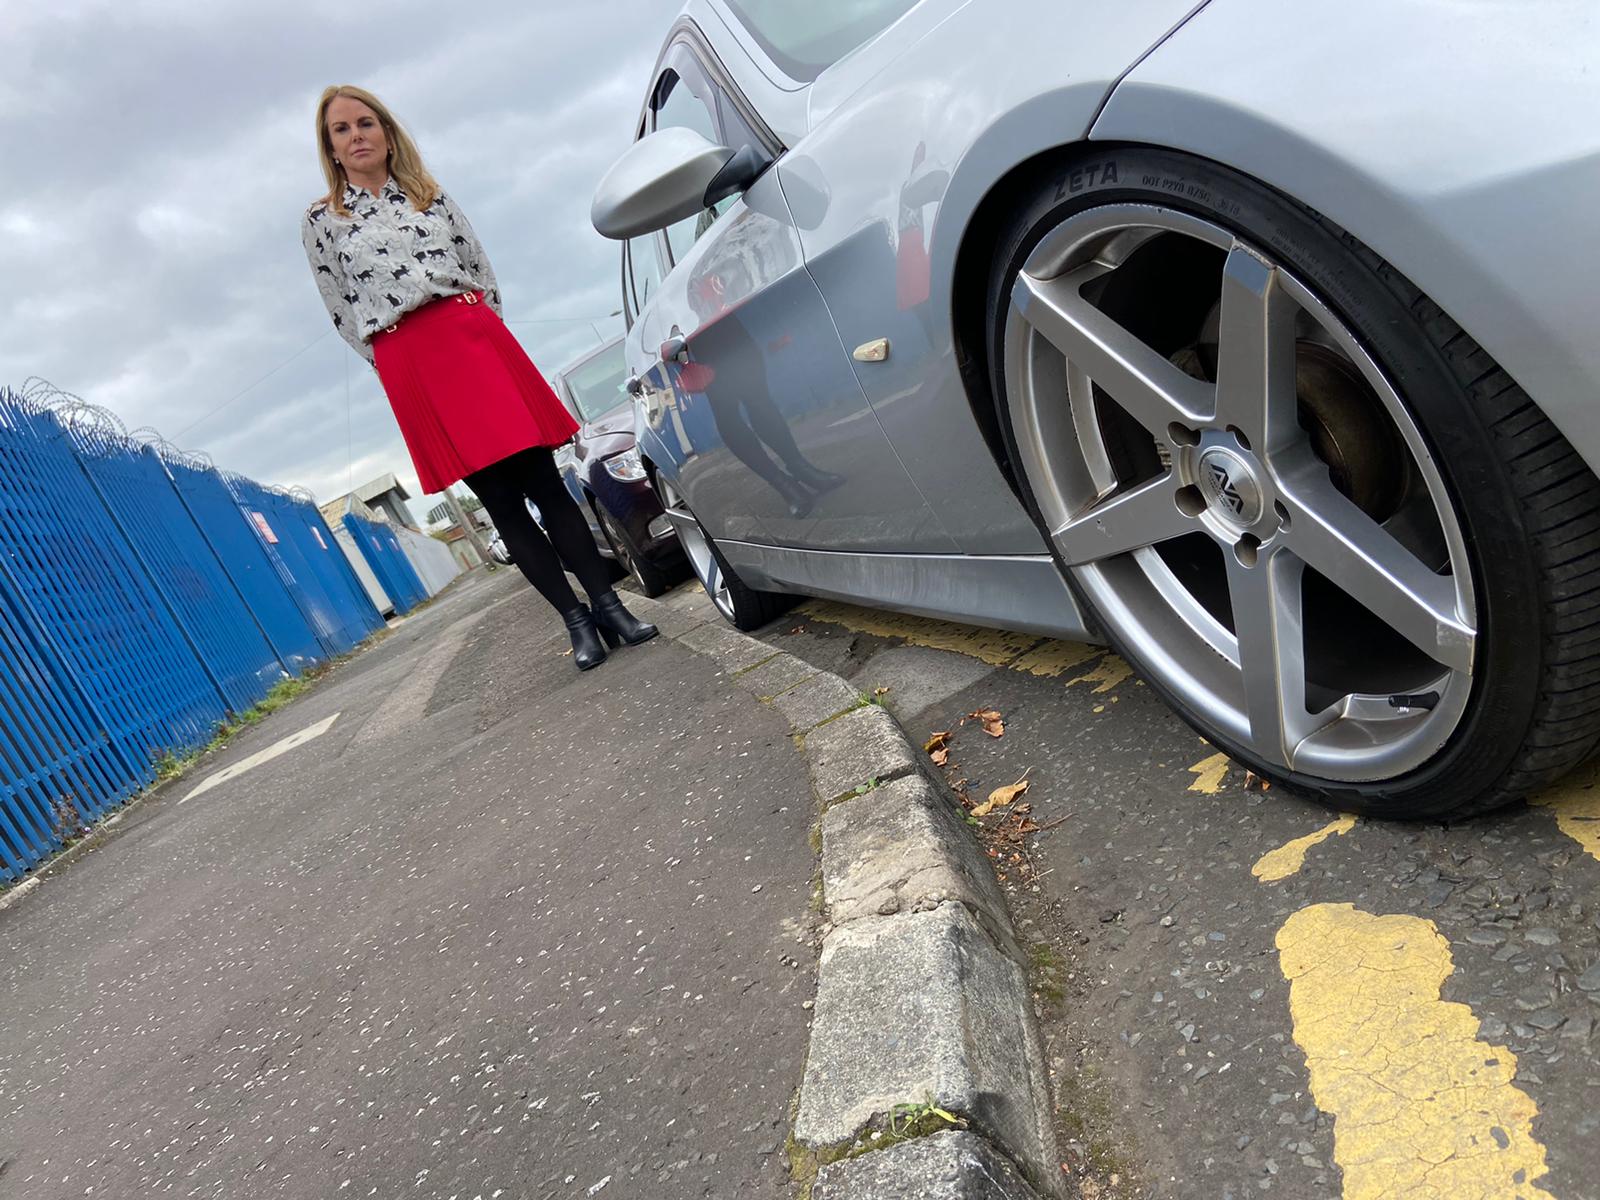 NO PARKING: Cllr Tina Black and residents are frustrated with the lack of progress on parking